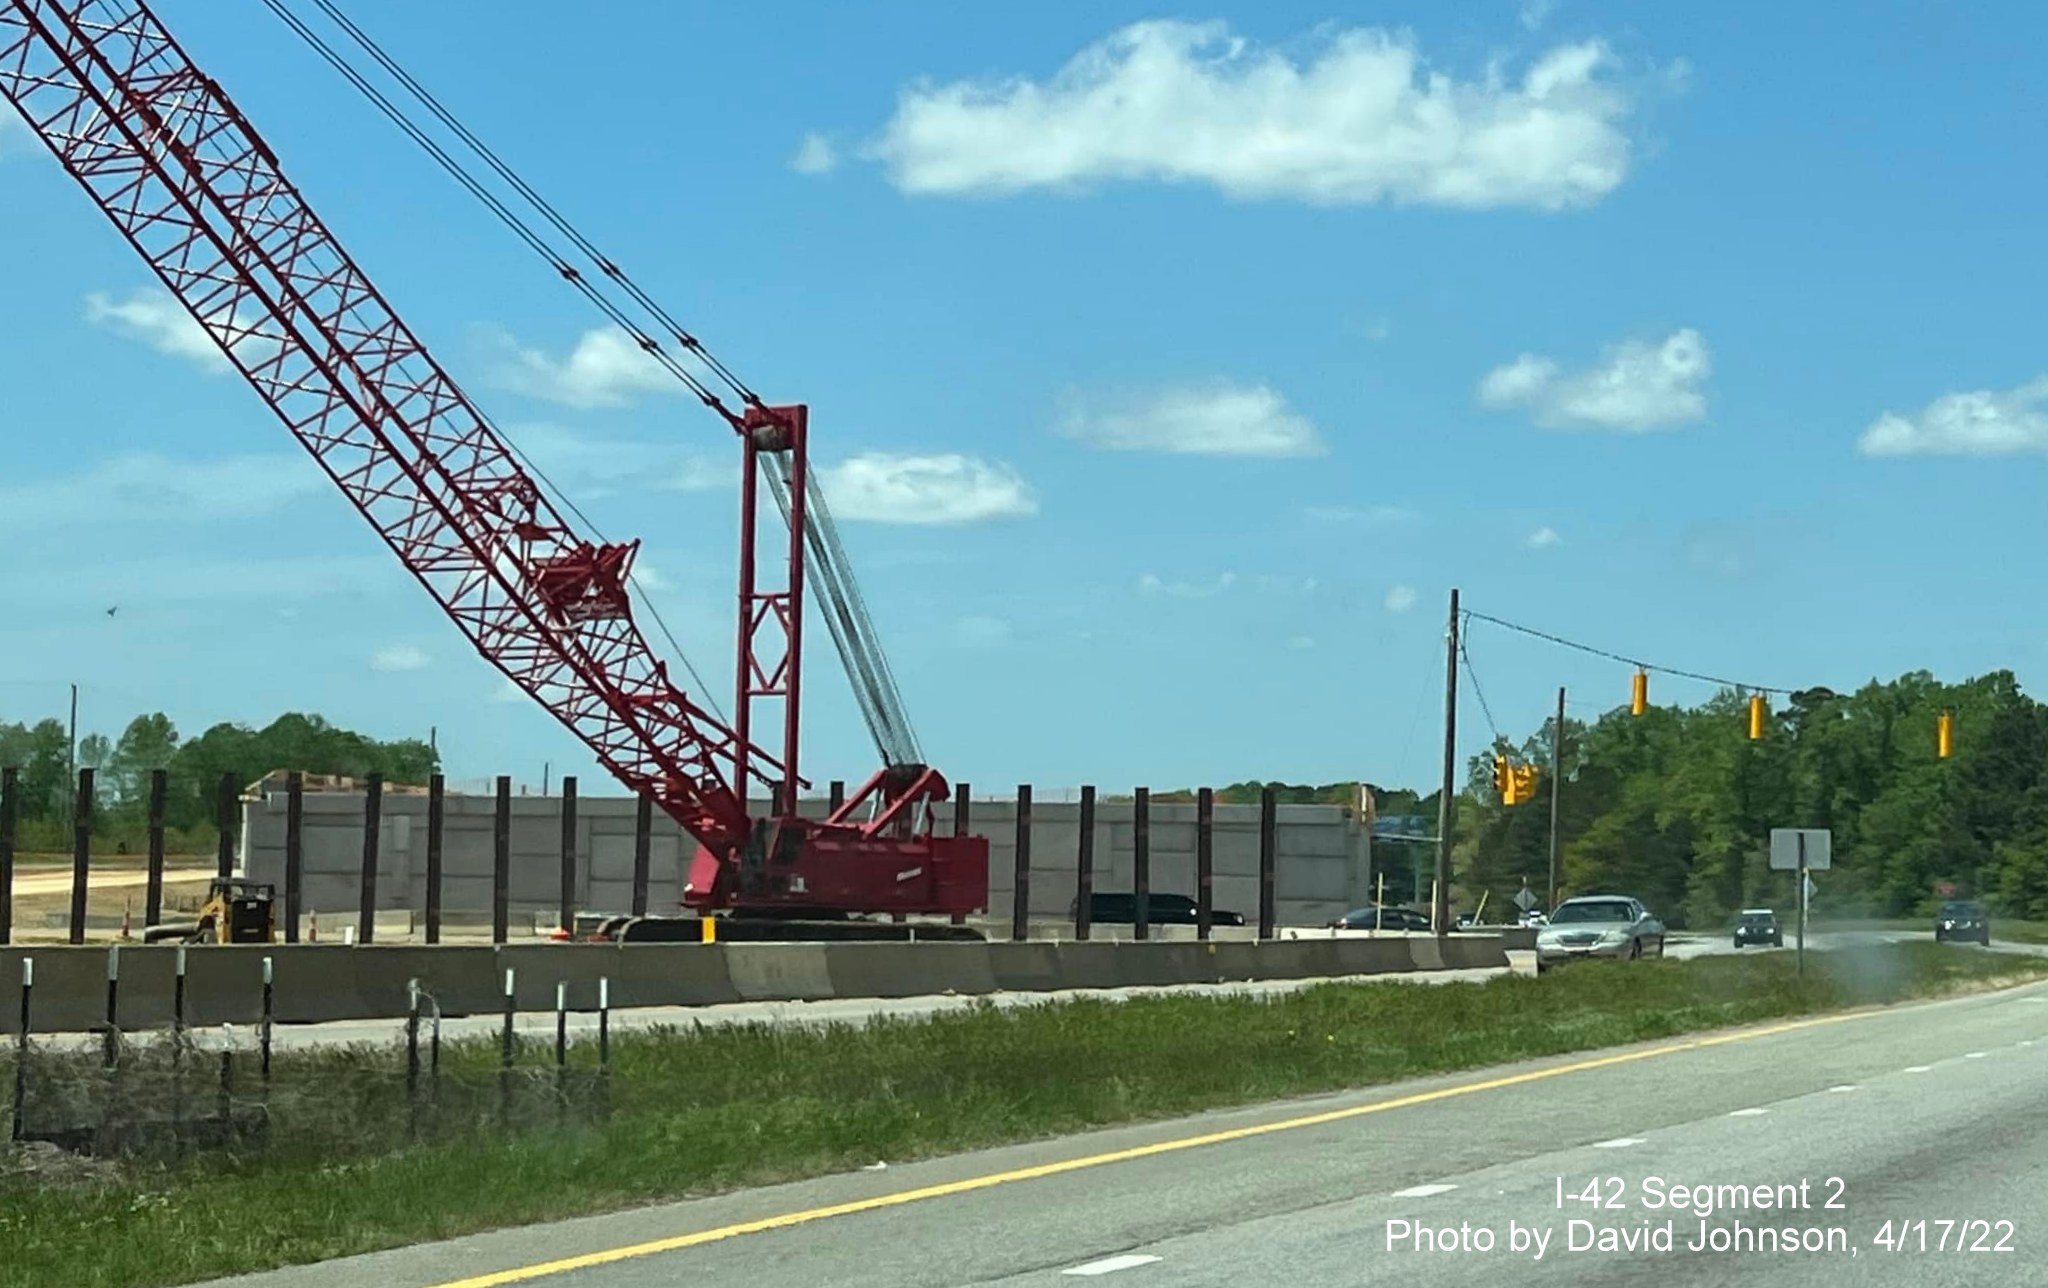 Image of bridge being constructed for future interchange of US 70 (Future I-42) and Wilson Mills Road in Johnston County, photo by David Johnson, April 2022